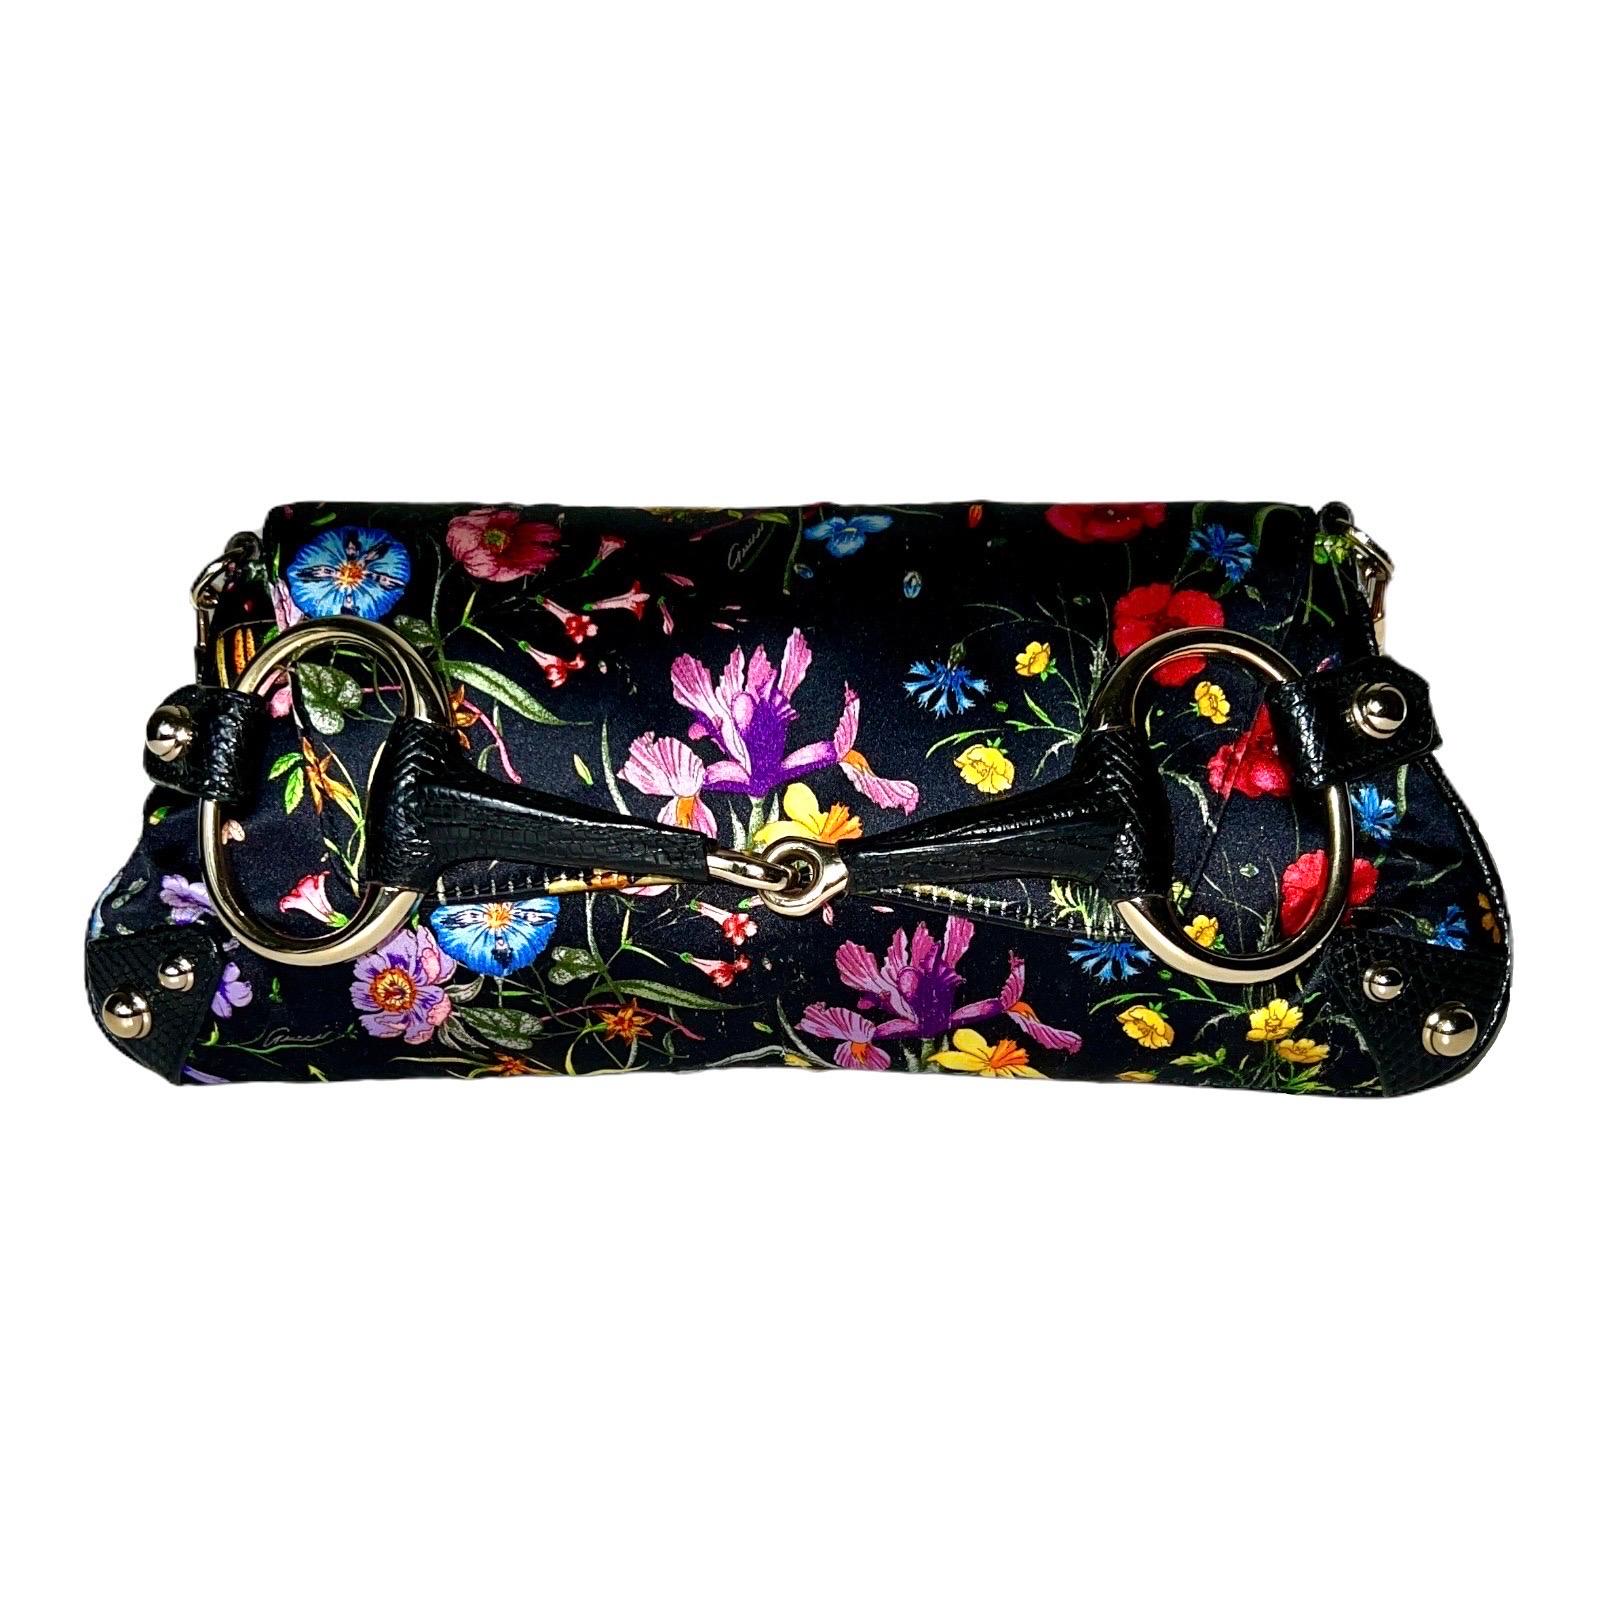 RARE GUCCI FLORAL FLORA PRINT SIGNATURE HORSEBIT BAG


DETAILS: 

A GUCCI signature piece that will last you for many years
Timeless classic - a true beauty!
Loved by many celebrities
From one of GUCCI's most stunning collections in the famous GUCCI